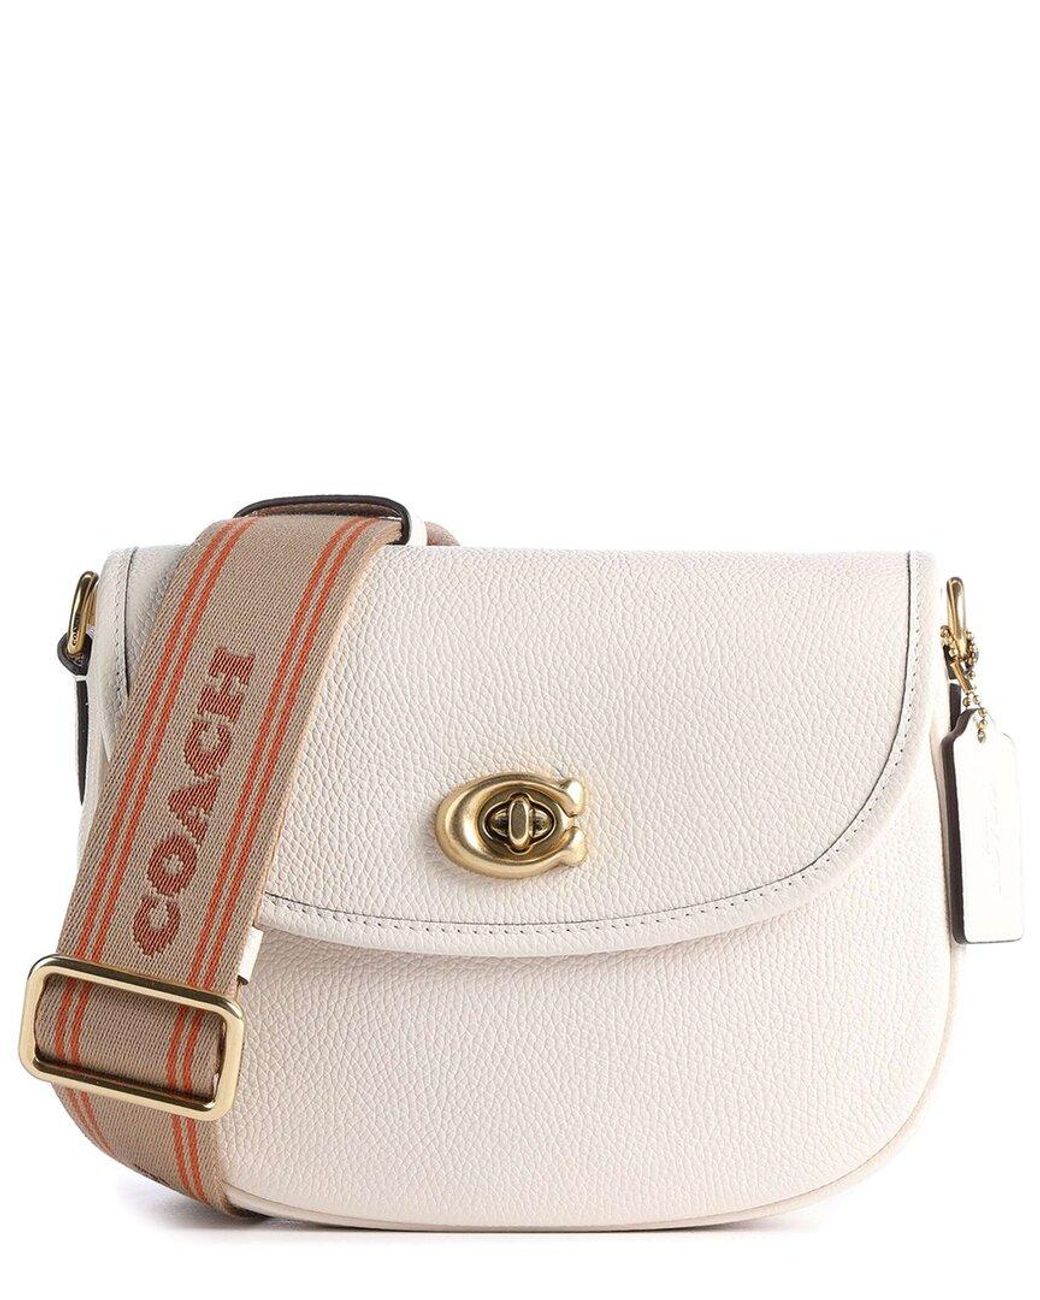 COACH Willow Polished Pebble Leather Saddle Bag in Natural | Lyst UK